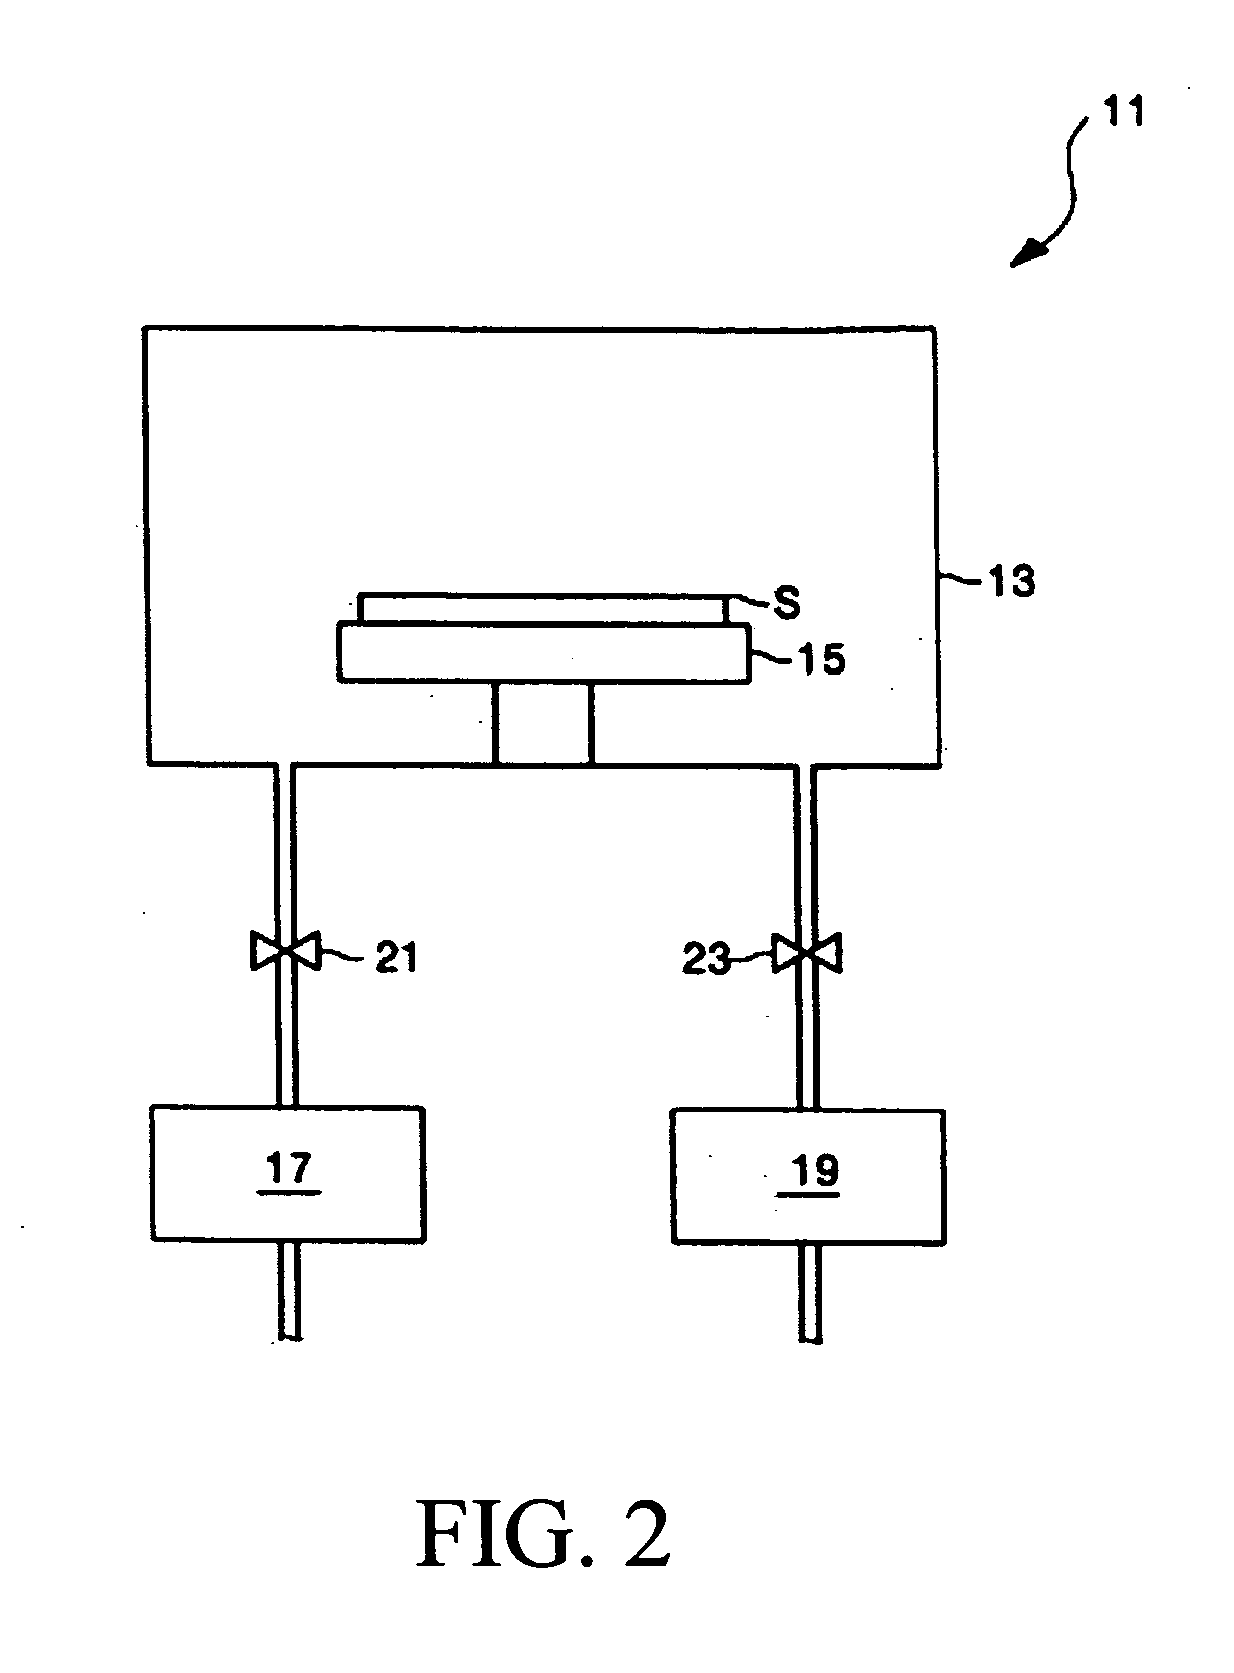 Methods for in-situ cleaning of semiconductor substrates and methods of semiconductor device fabrication employing the same